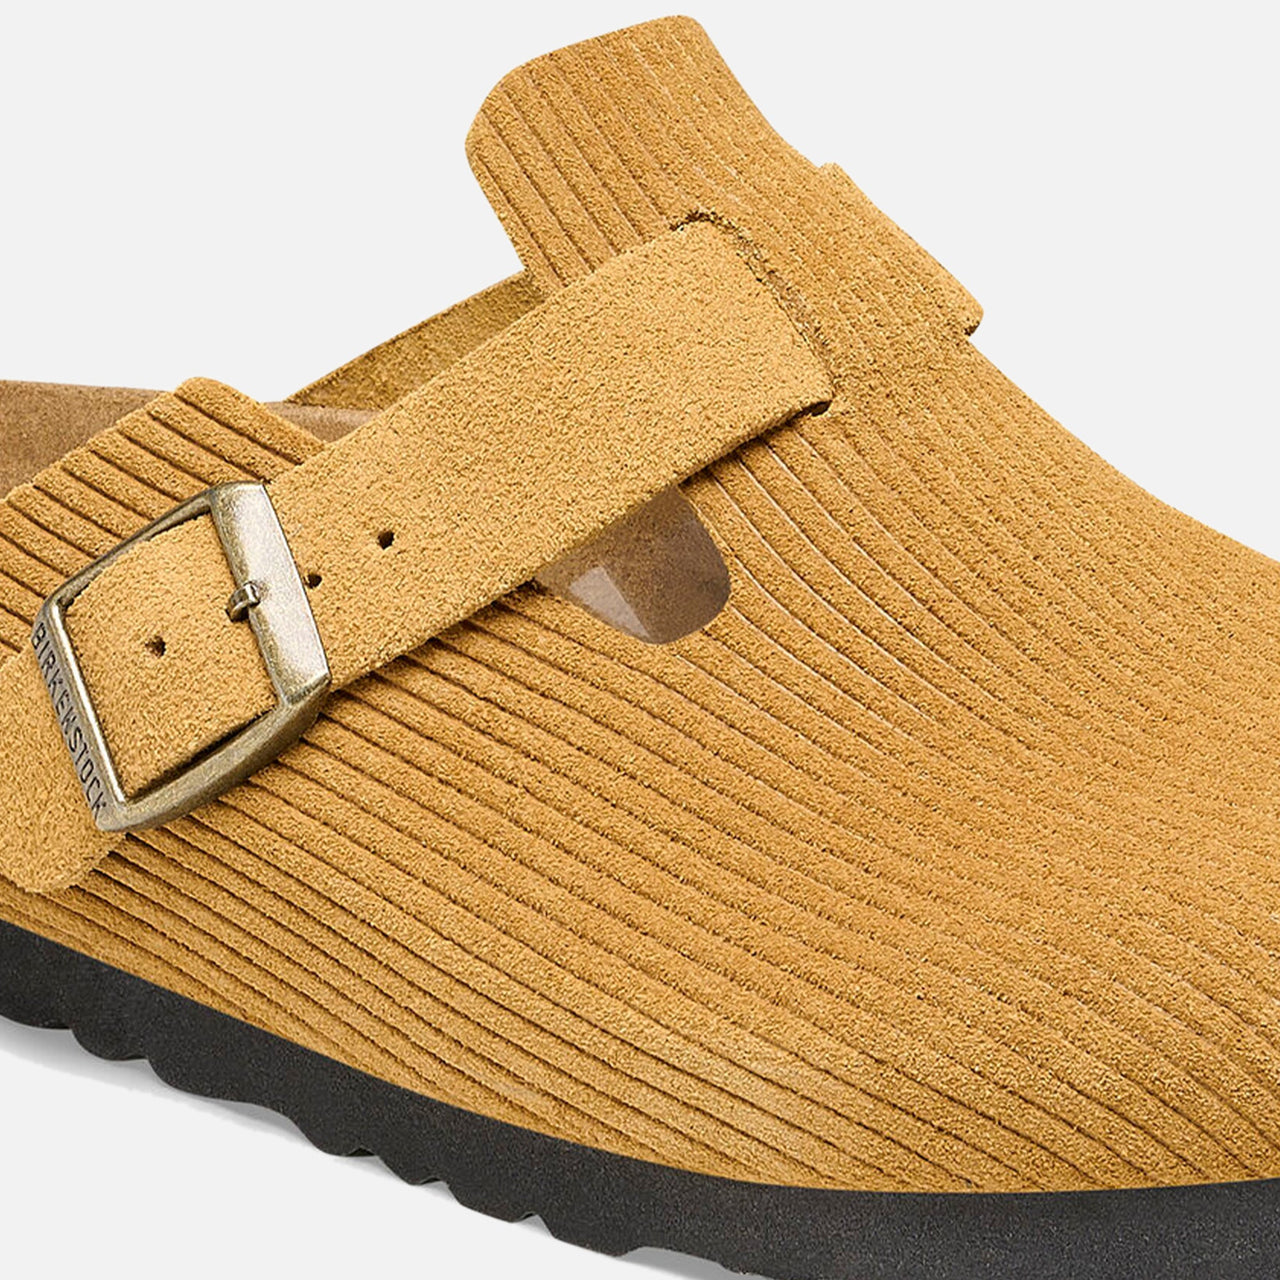 Birkenstock Boston clogs in Corduroy Cork Brown with a comfortable cork footbed